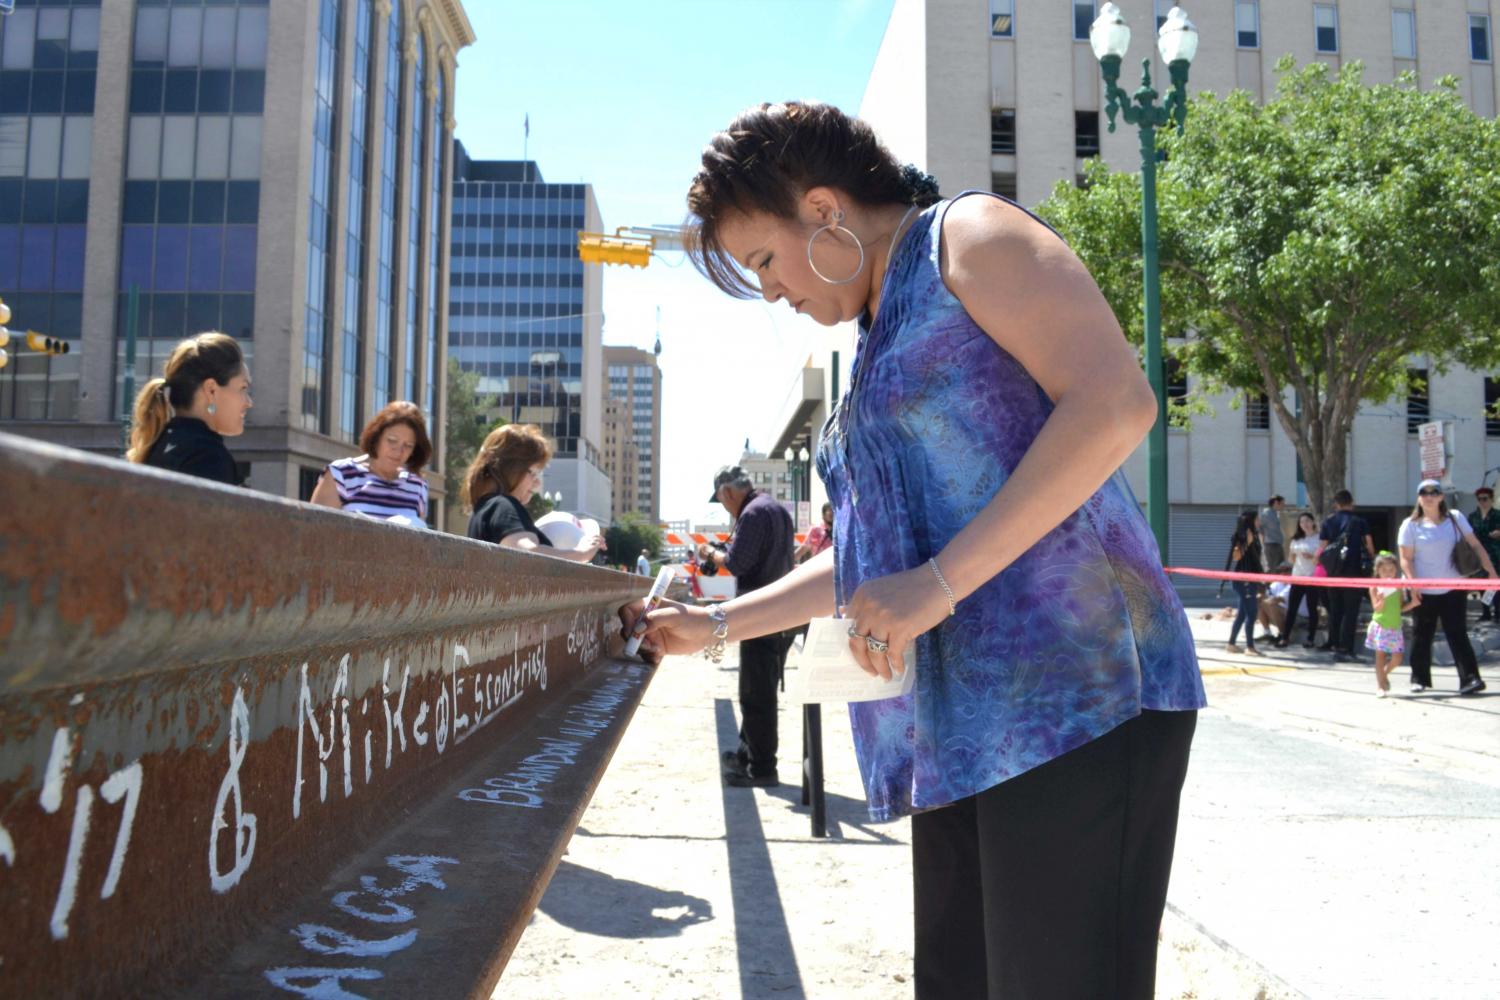 Woman signing her name in the rail at the “ Make your Mark:  Sign the Last Piece of Rail” event at Downtown El Paso on August 10.